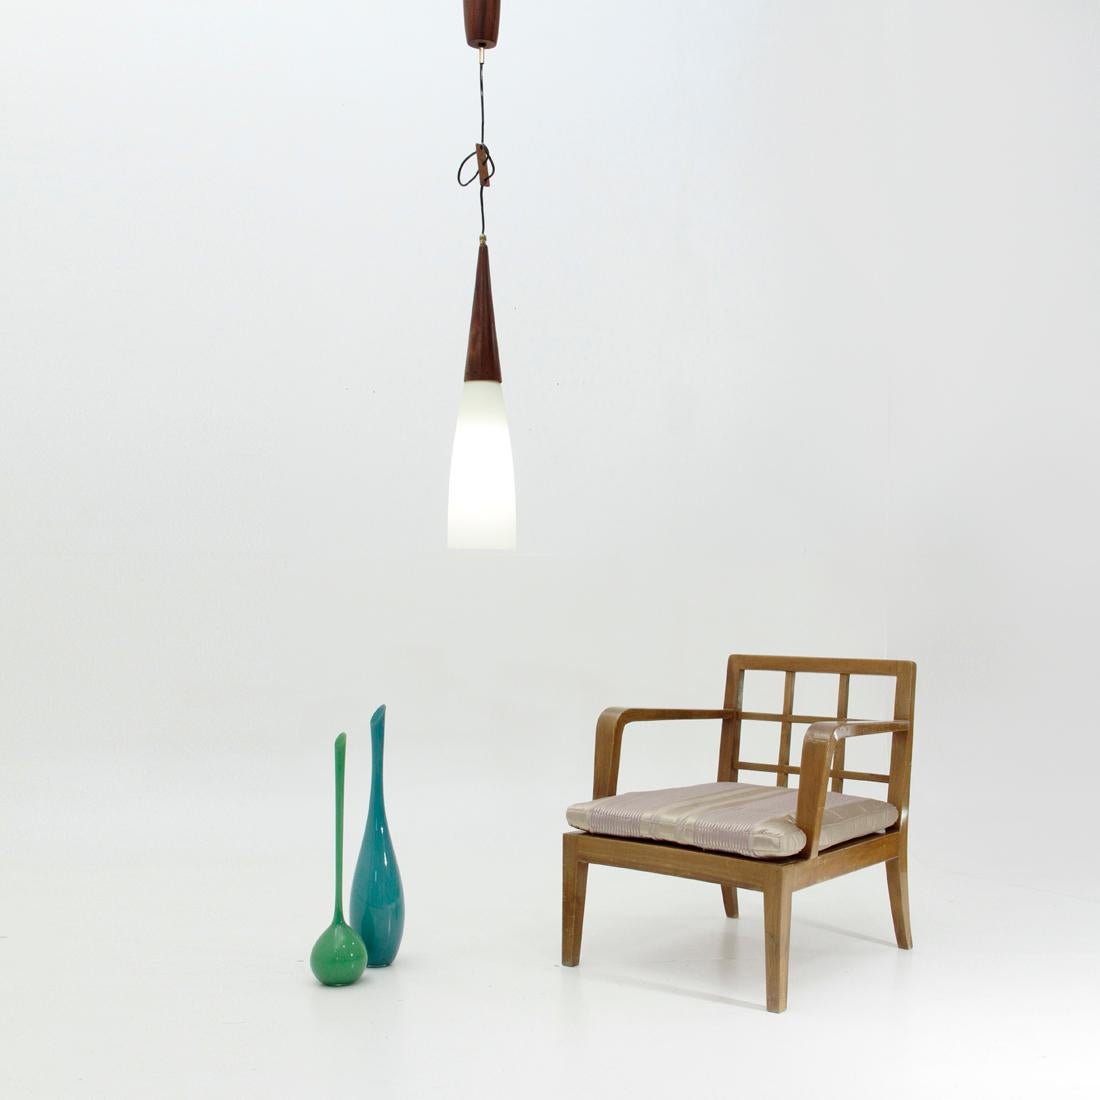 Midcentury Pendant Lamp in Teak and Opaline Glass, 1960s For Sale 3